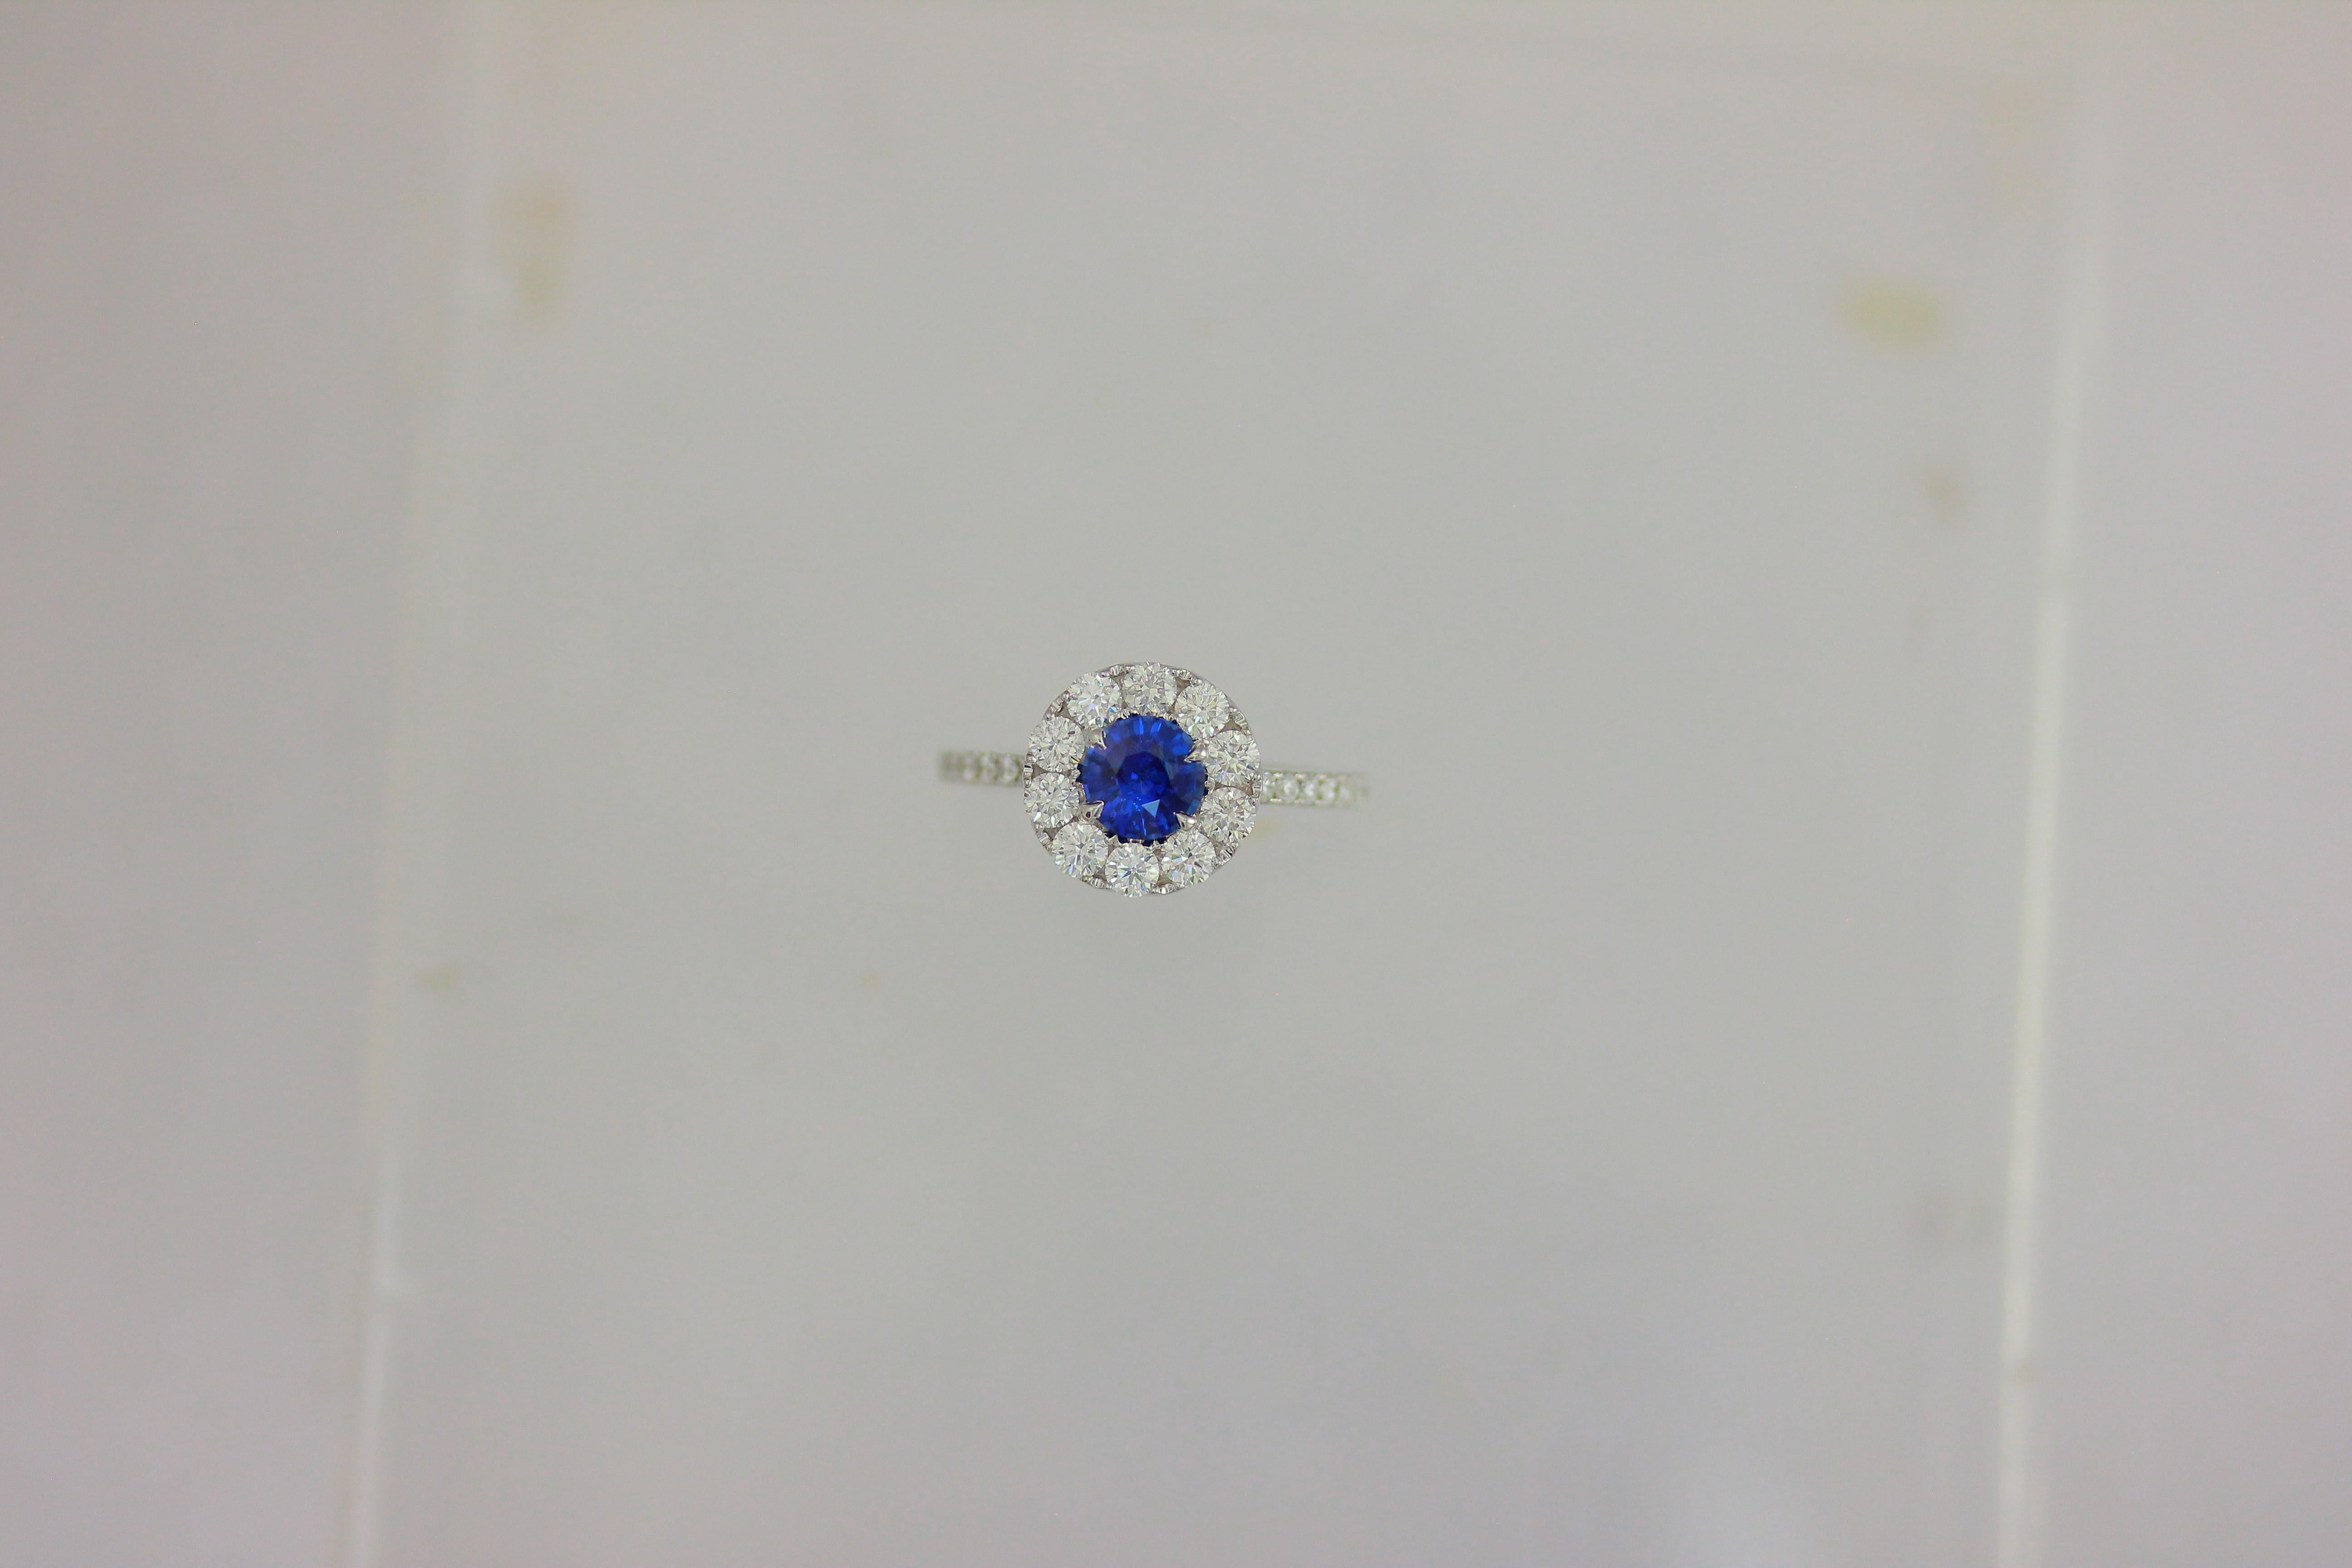 Round Cut Frederic Sage 0.91 Carat Round Sapphire Diamond Engagement Bridal Cocktail Ring For Sale